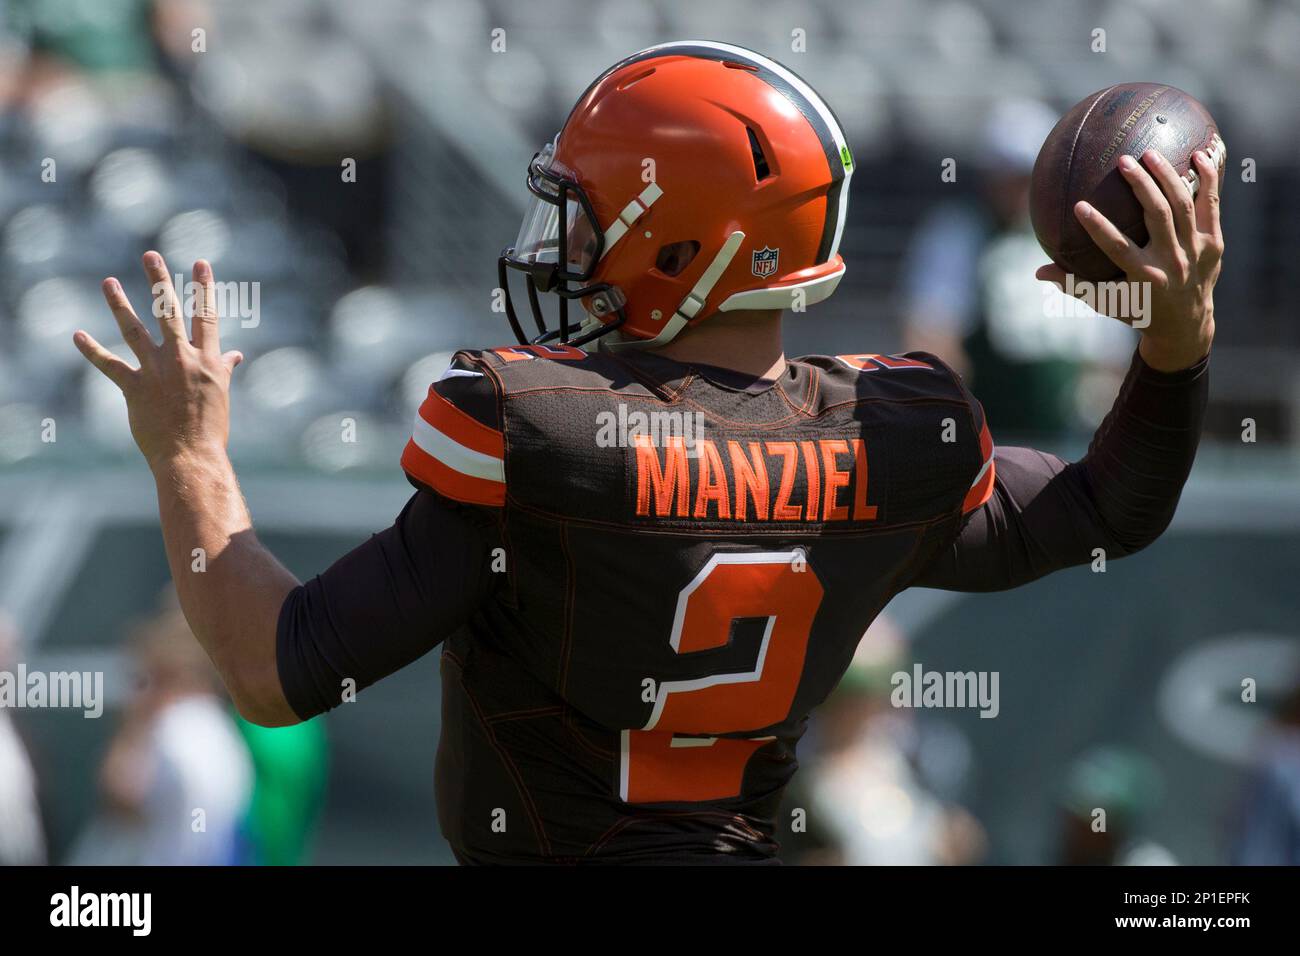 April 26, 2016 - Former Cleveland Browns quarterback Johnny Manziel  indicted for domestic violence by a Dallas grand jury. Pictured: September  13, 2015, Cleveland Browns quarterback Johnny Manziel (2) throws the ball